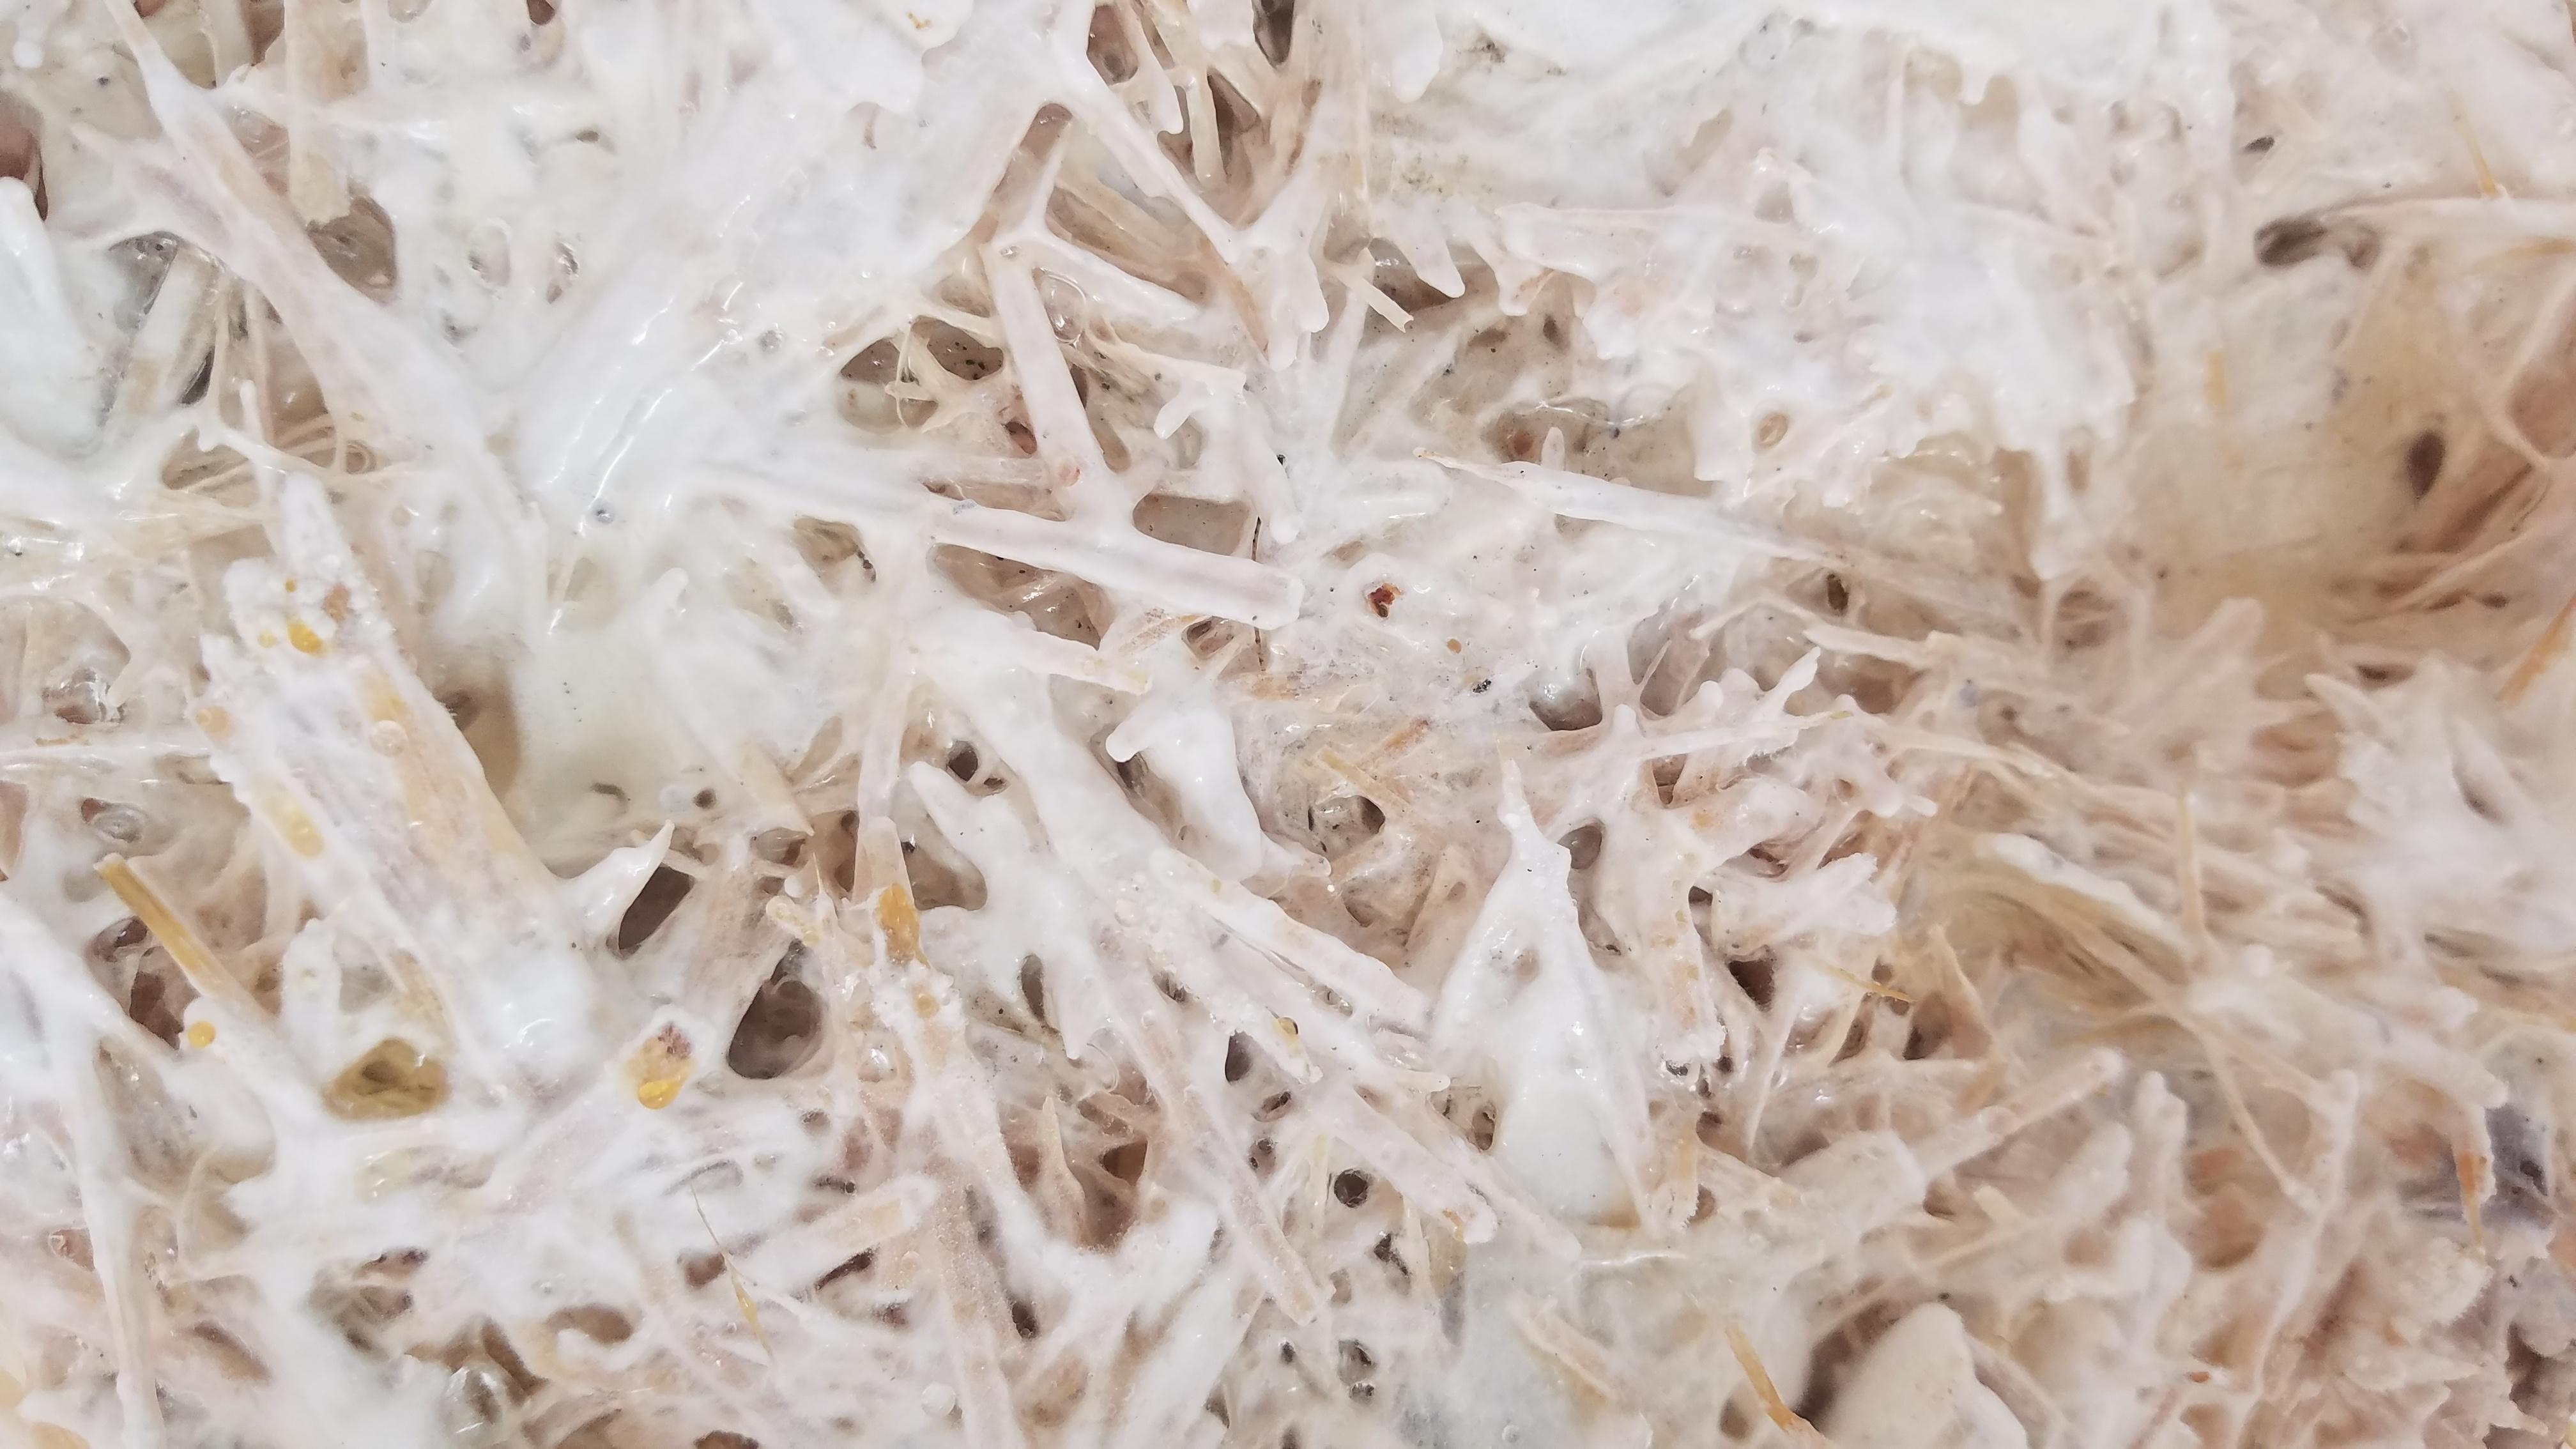 a number of overlapping tan and white straw looking mycelium fungi